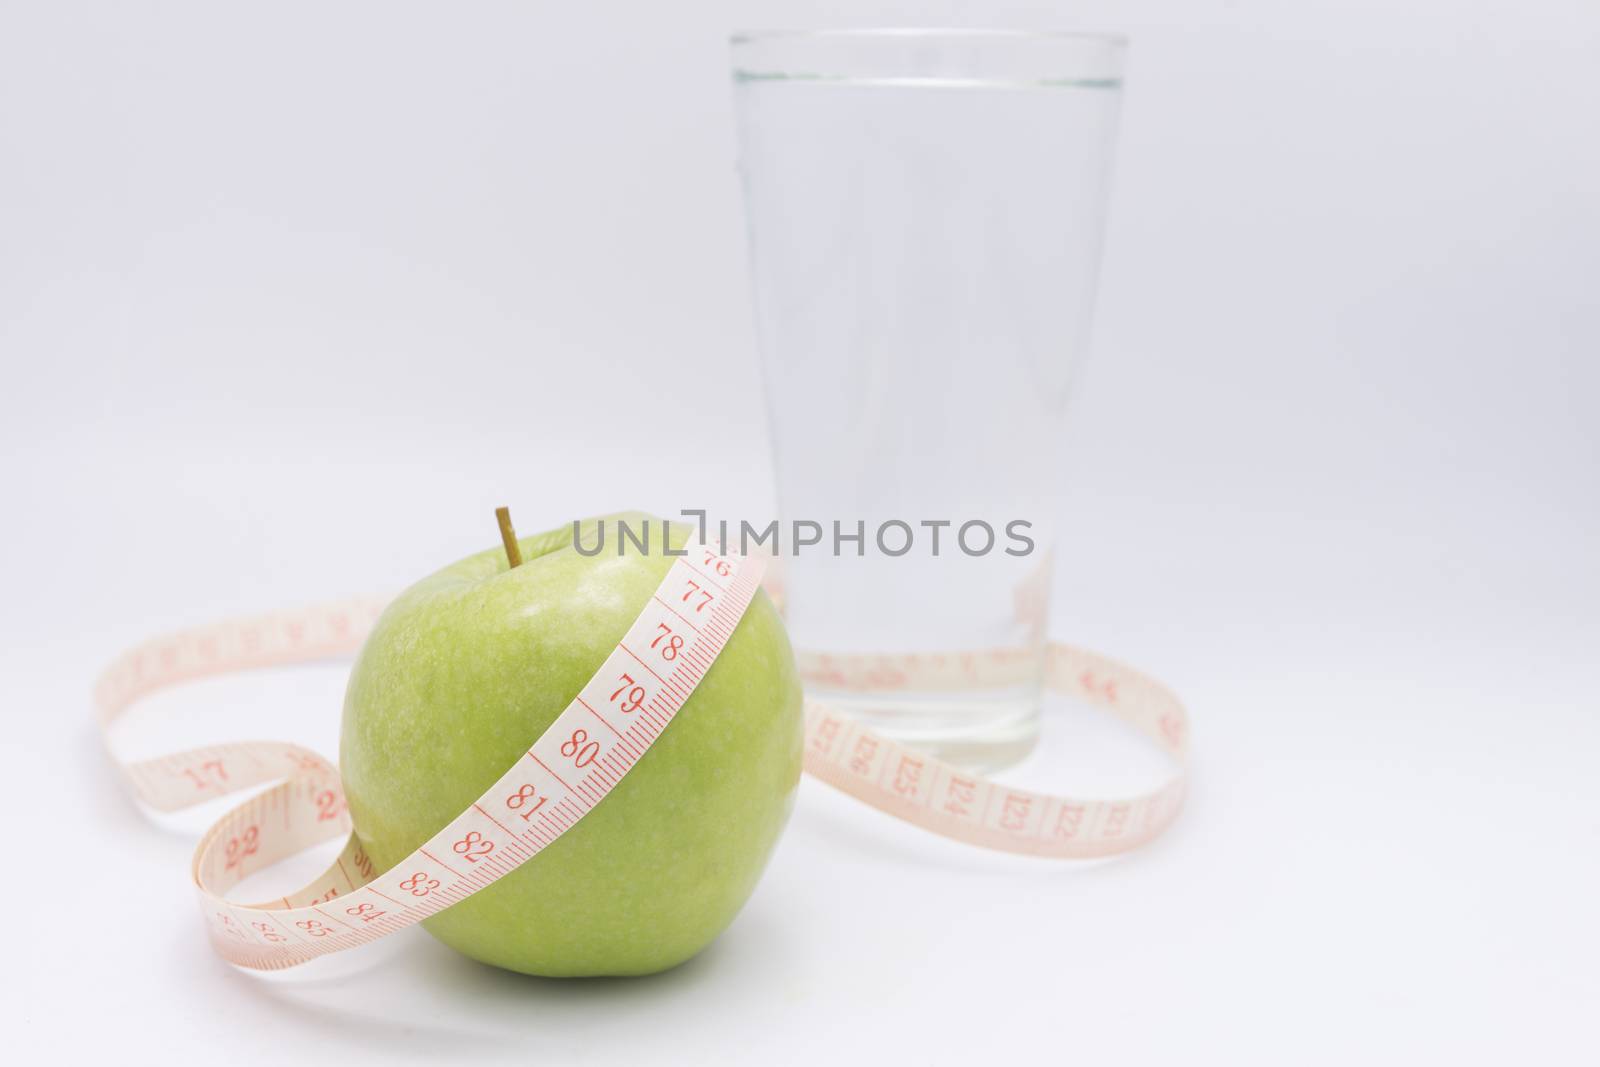 A green apple with a measuring tape wrapped around it for the concept of dieting.